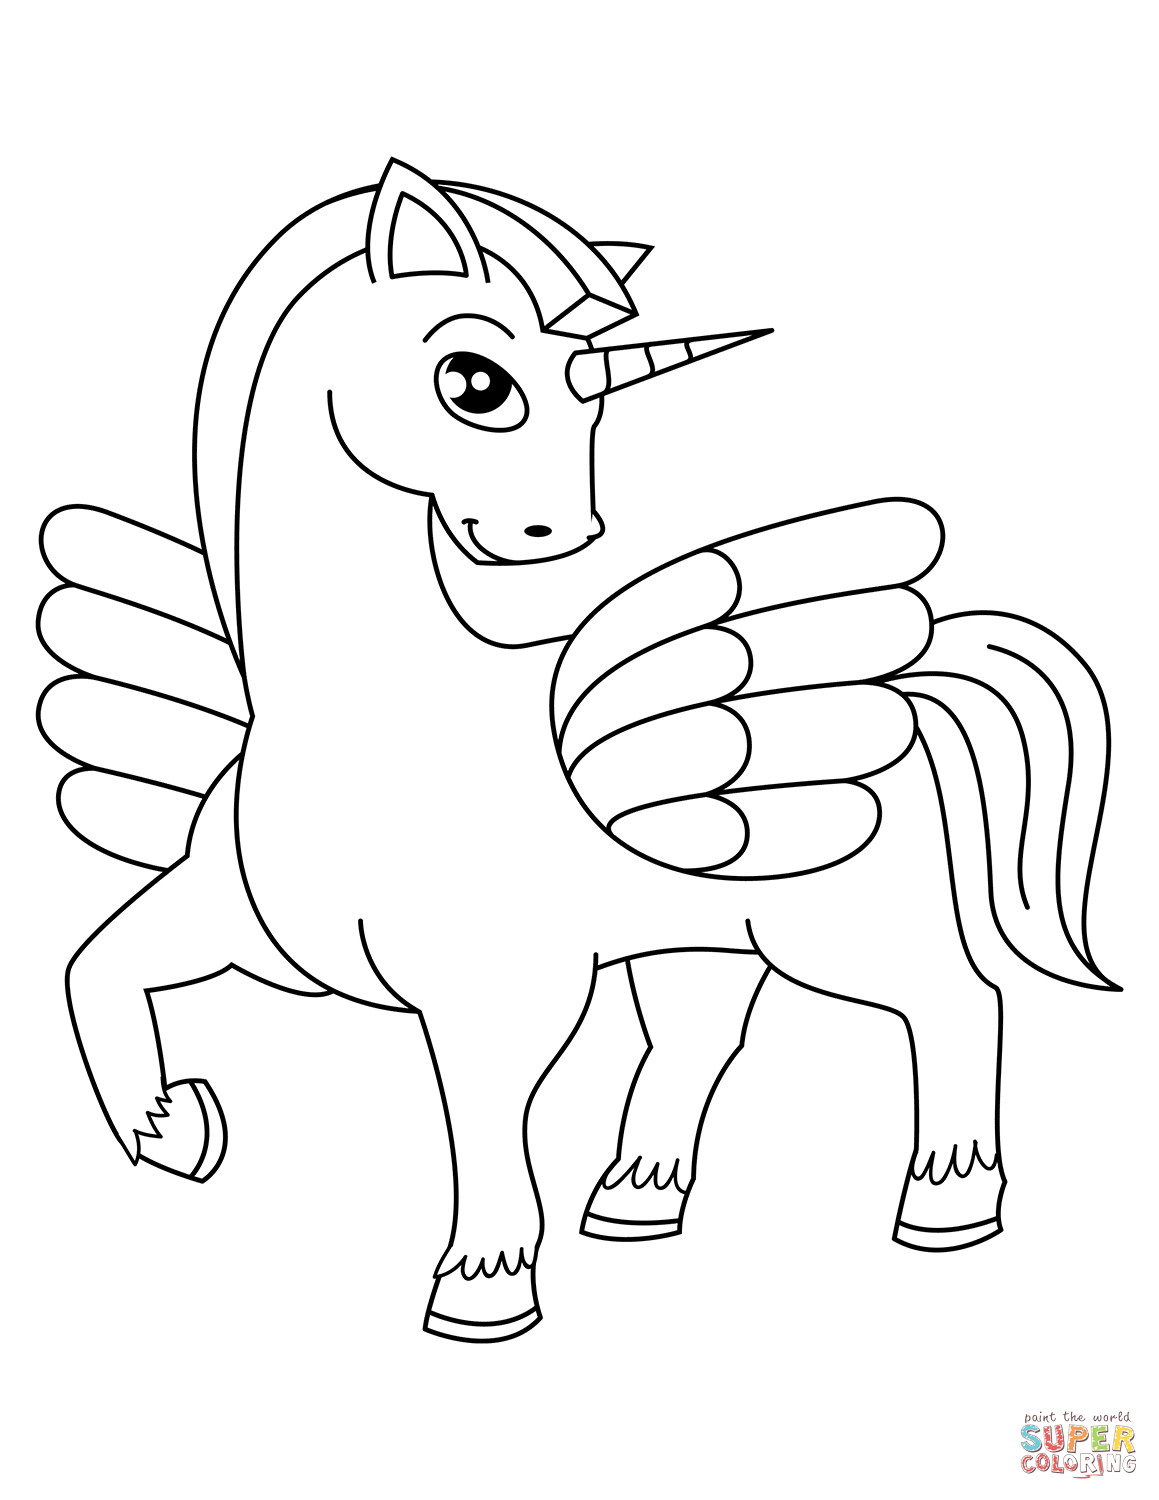 Printable Unicorn Coloring Pages
 Cute Winged Unicorn coloring page